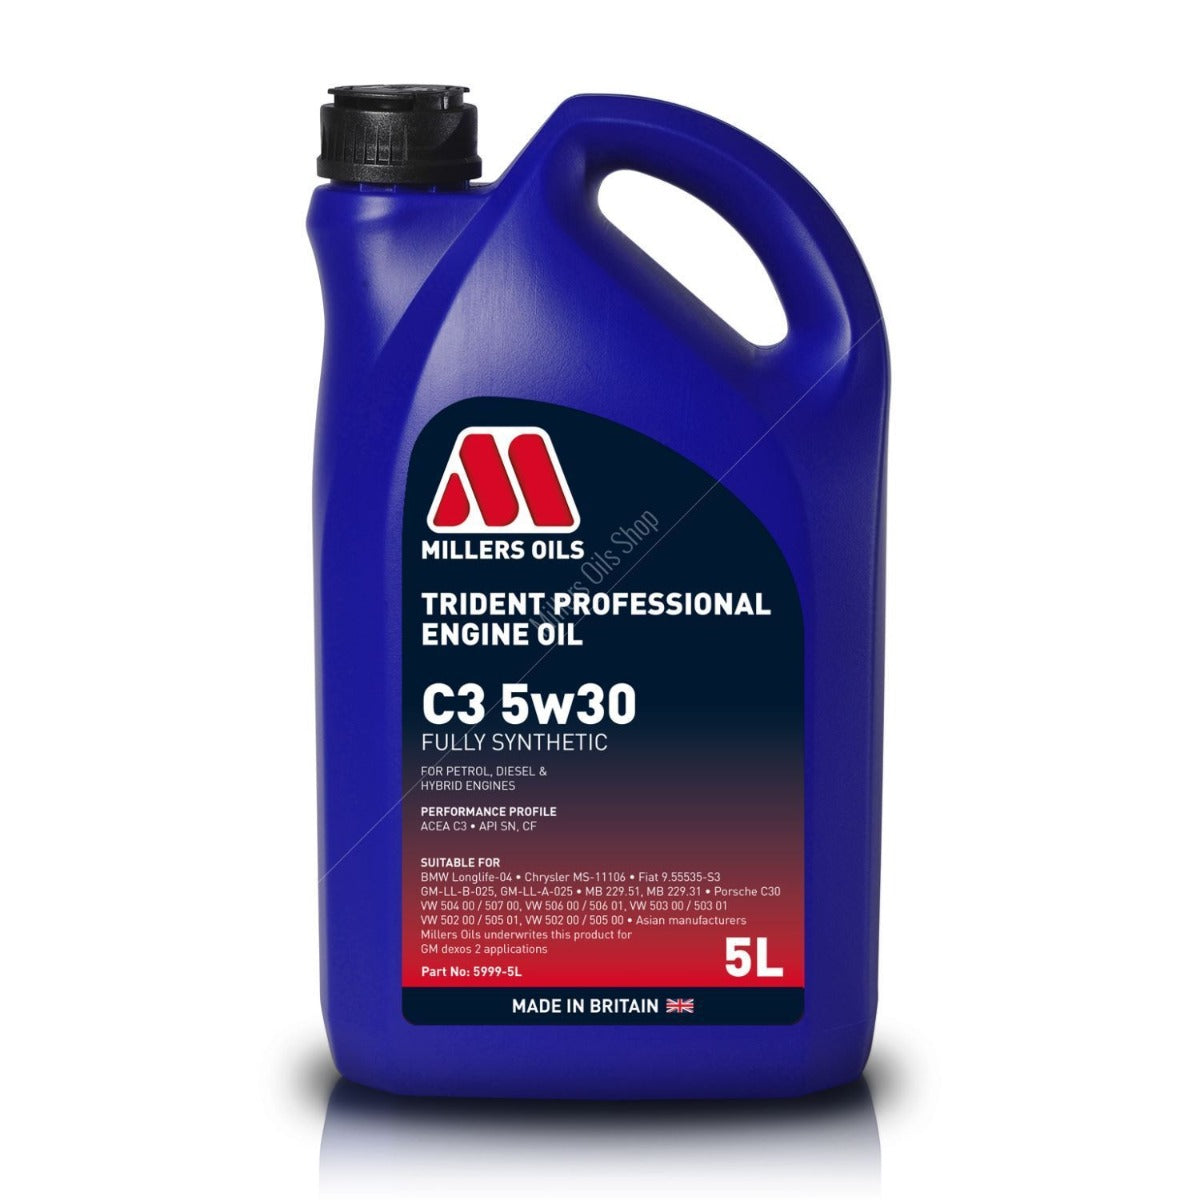 Millers Trident Professional Fully Synthetic C3 5w30 Engine Oil (5L)